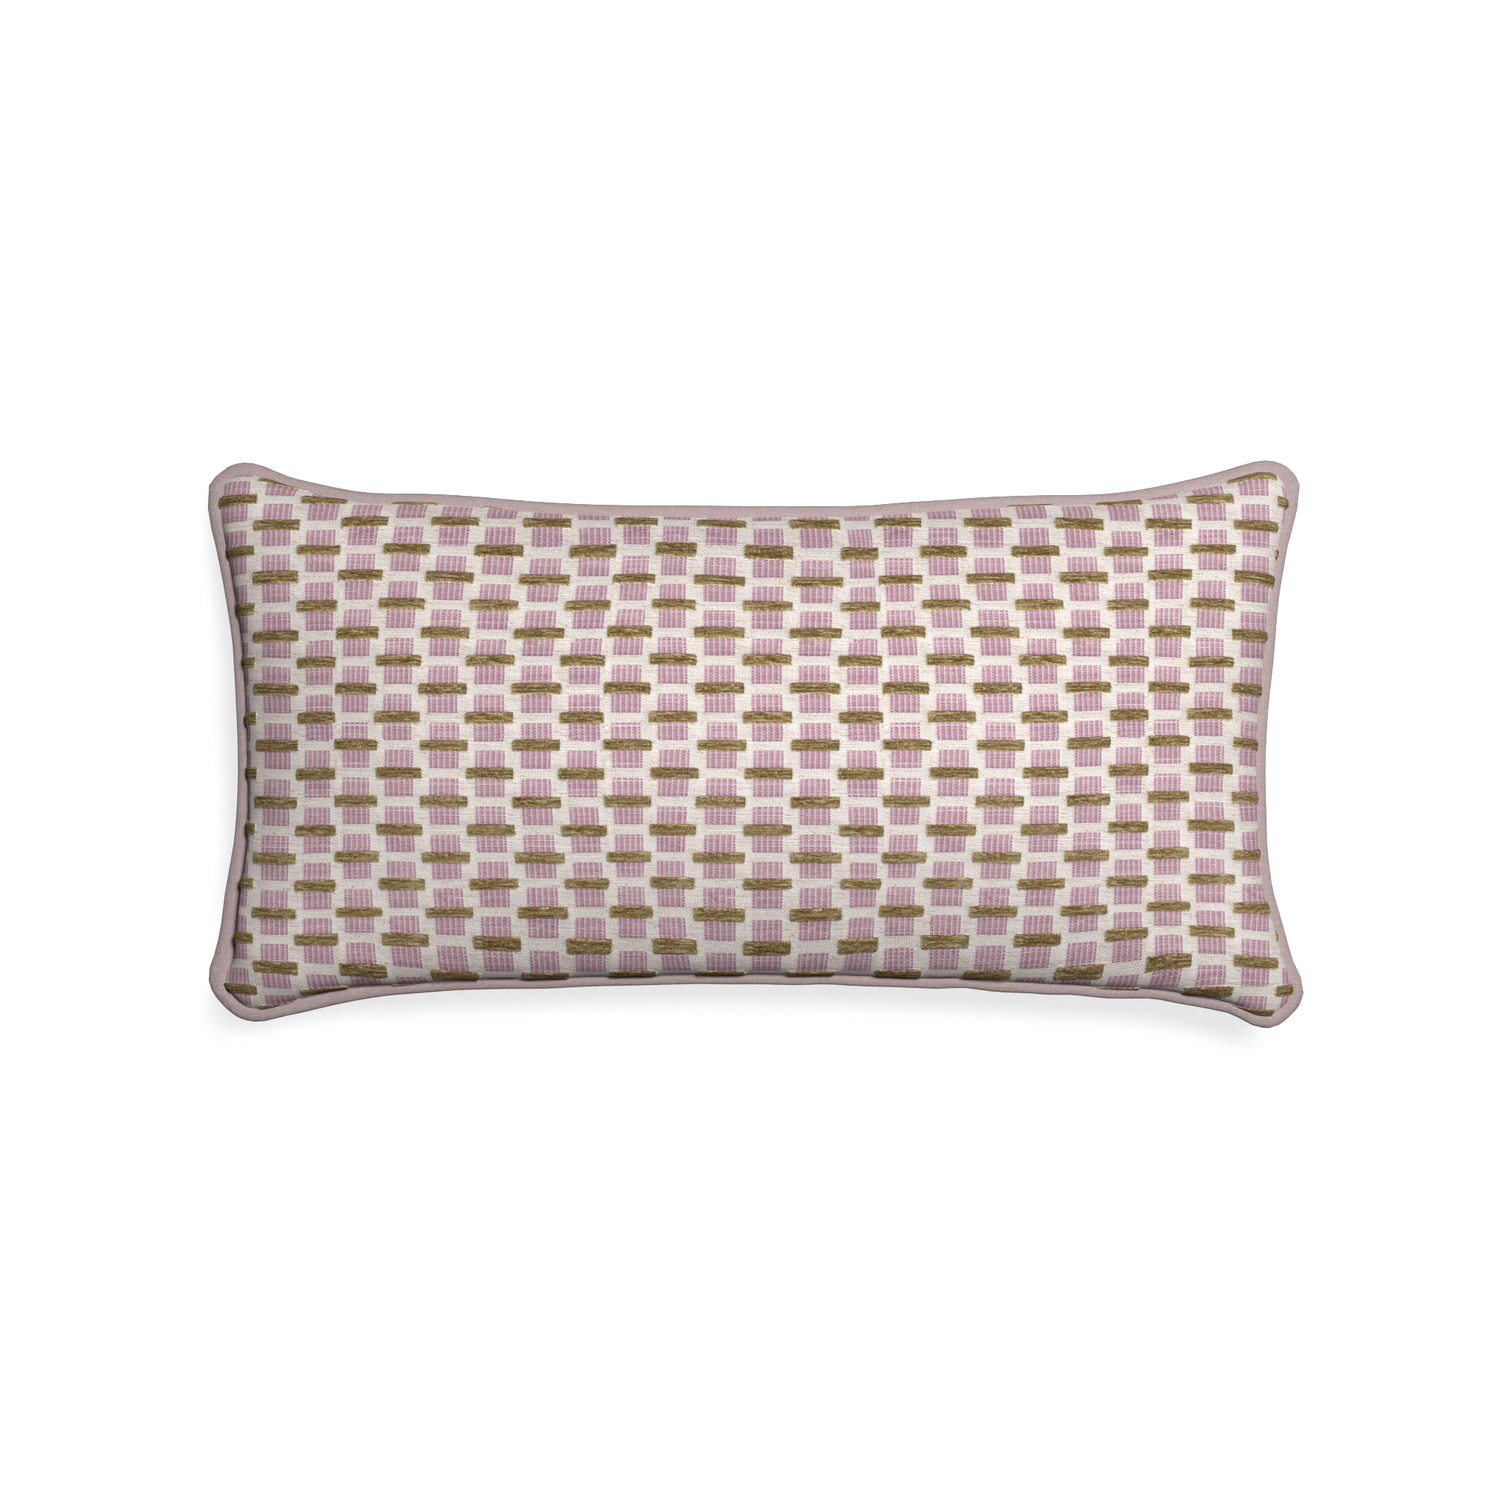 Midi-lumbar willow orchid custom pink geometric chenillepillow with orchid piping on white background